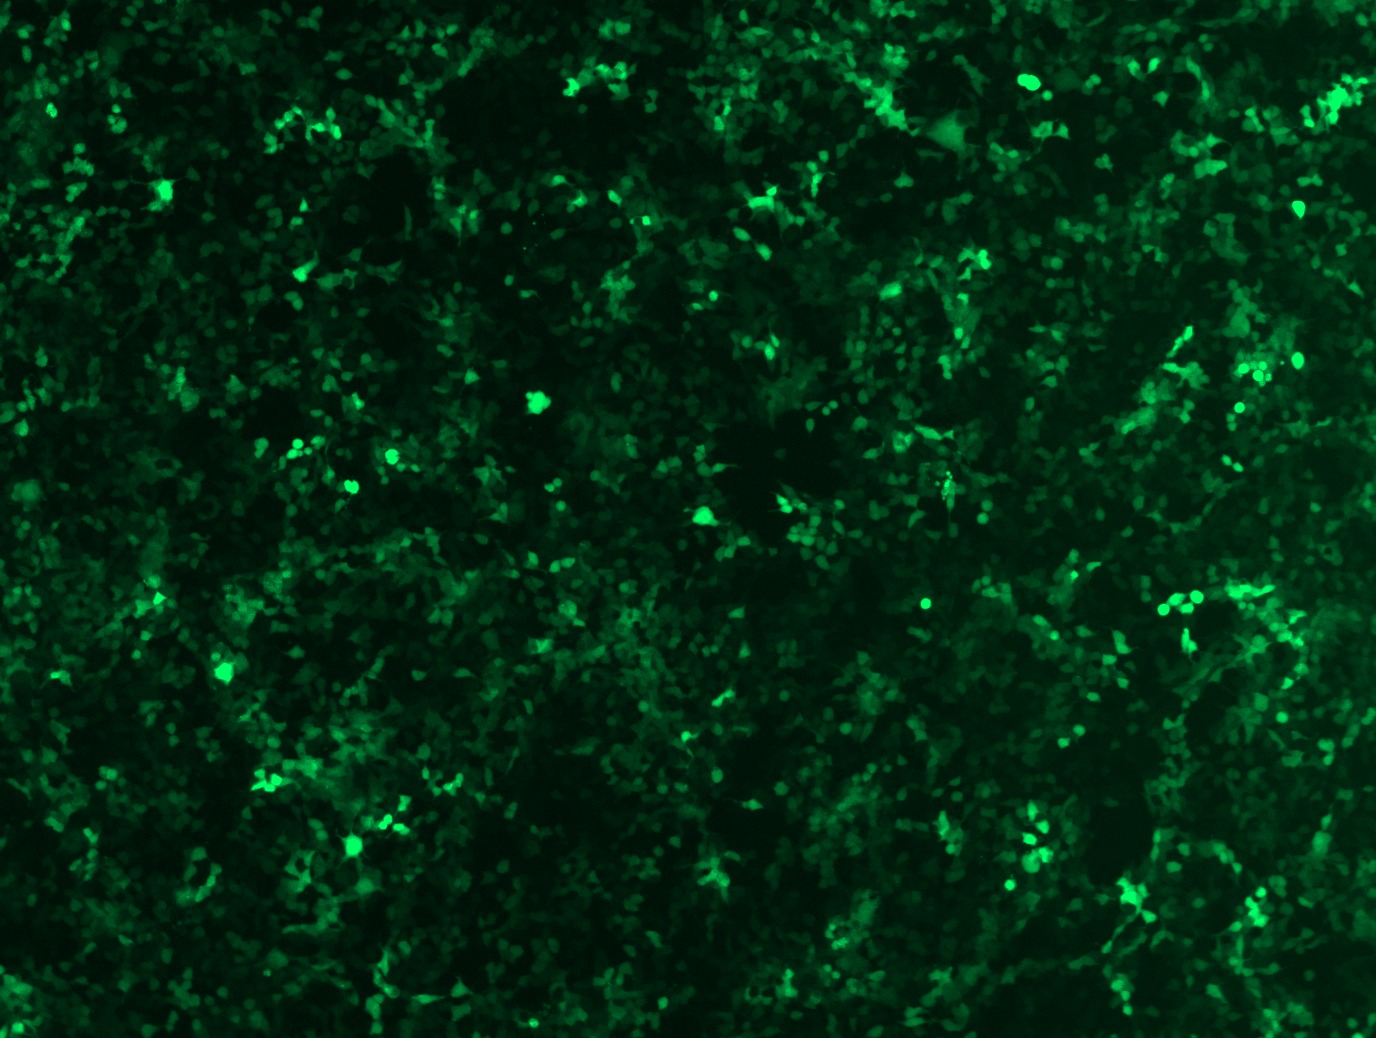 GFP signal was observed under microscope at 48 hours after transduction of TL306767A virus into HEK293 cells. TL306767A virus was prepared using lenti-shRNA TL306767A and TR30037 packaging kit.